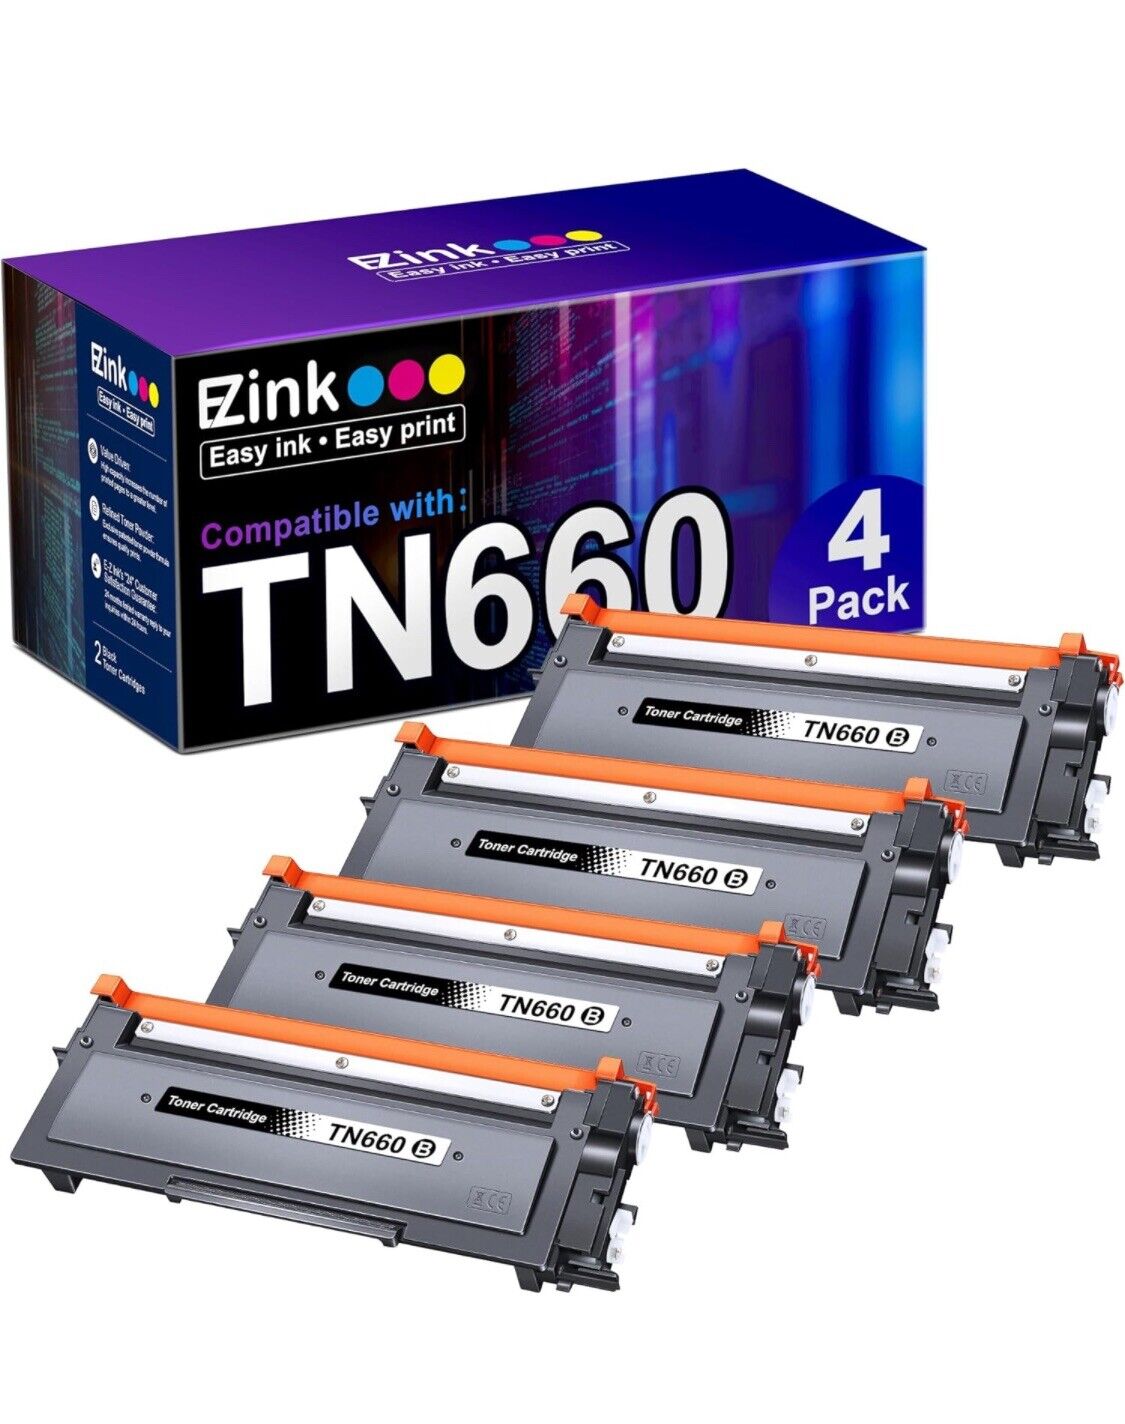 E-Z Ink Compatible Toner Cartridge Replacement For Brother TN660 TN630 4 Pack